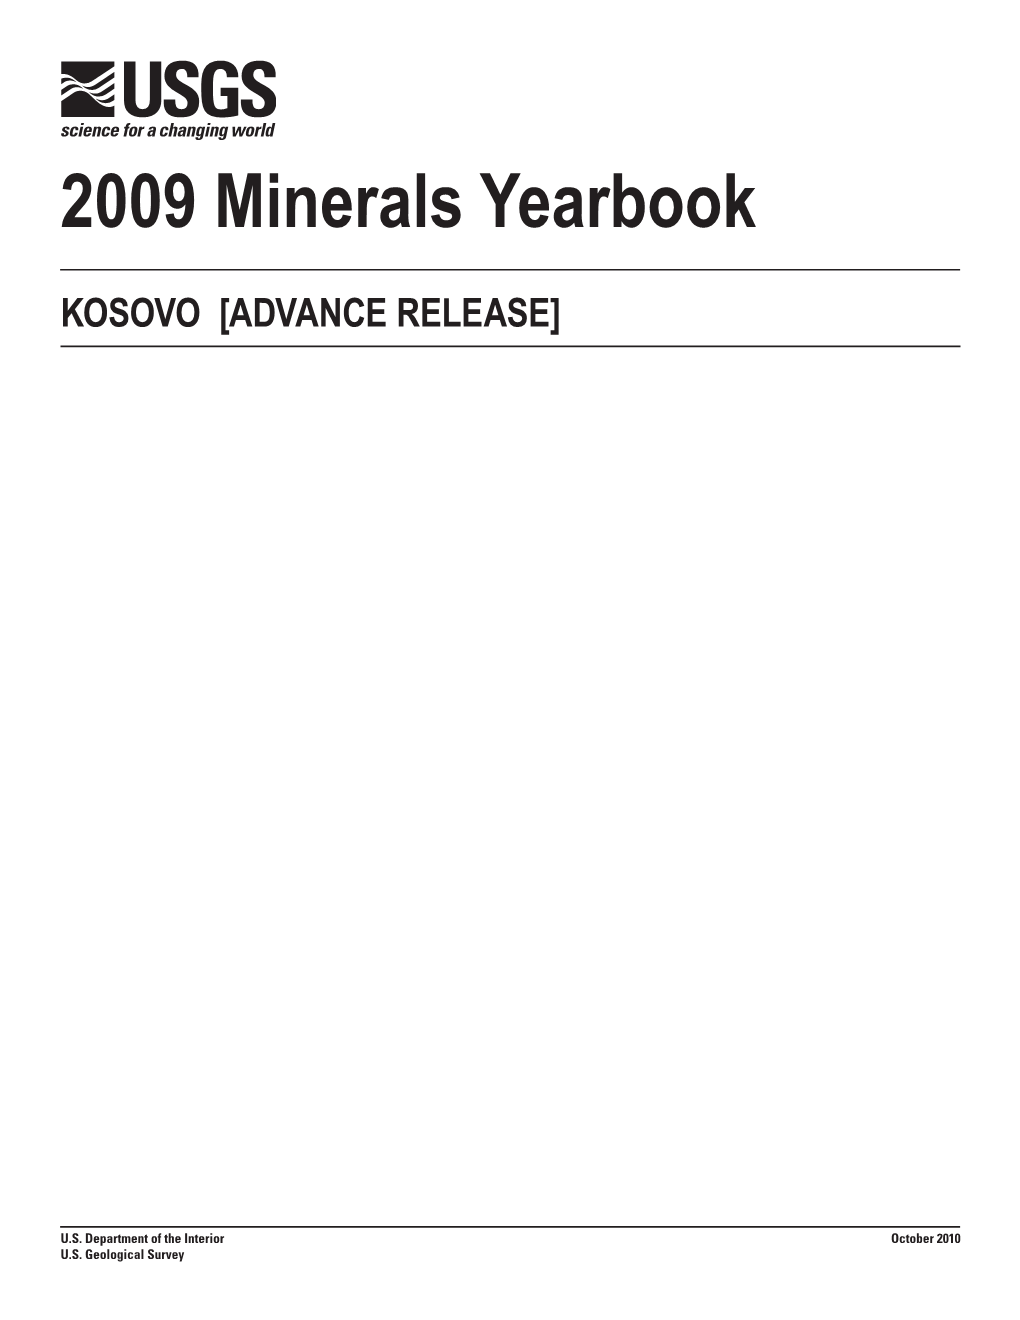 The Mineral Industry of Kosovo in 2009